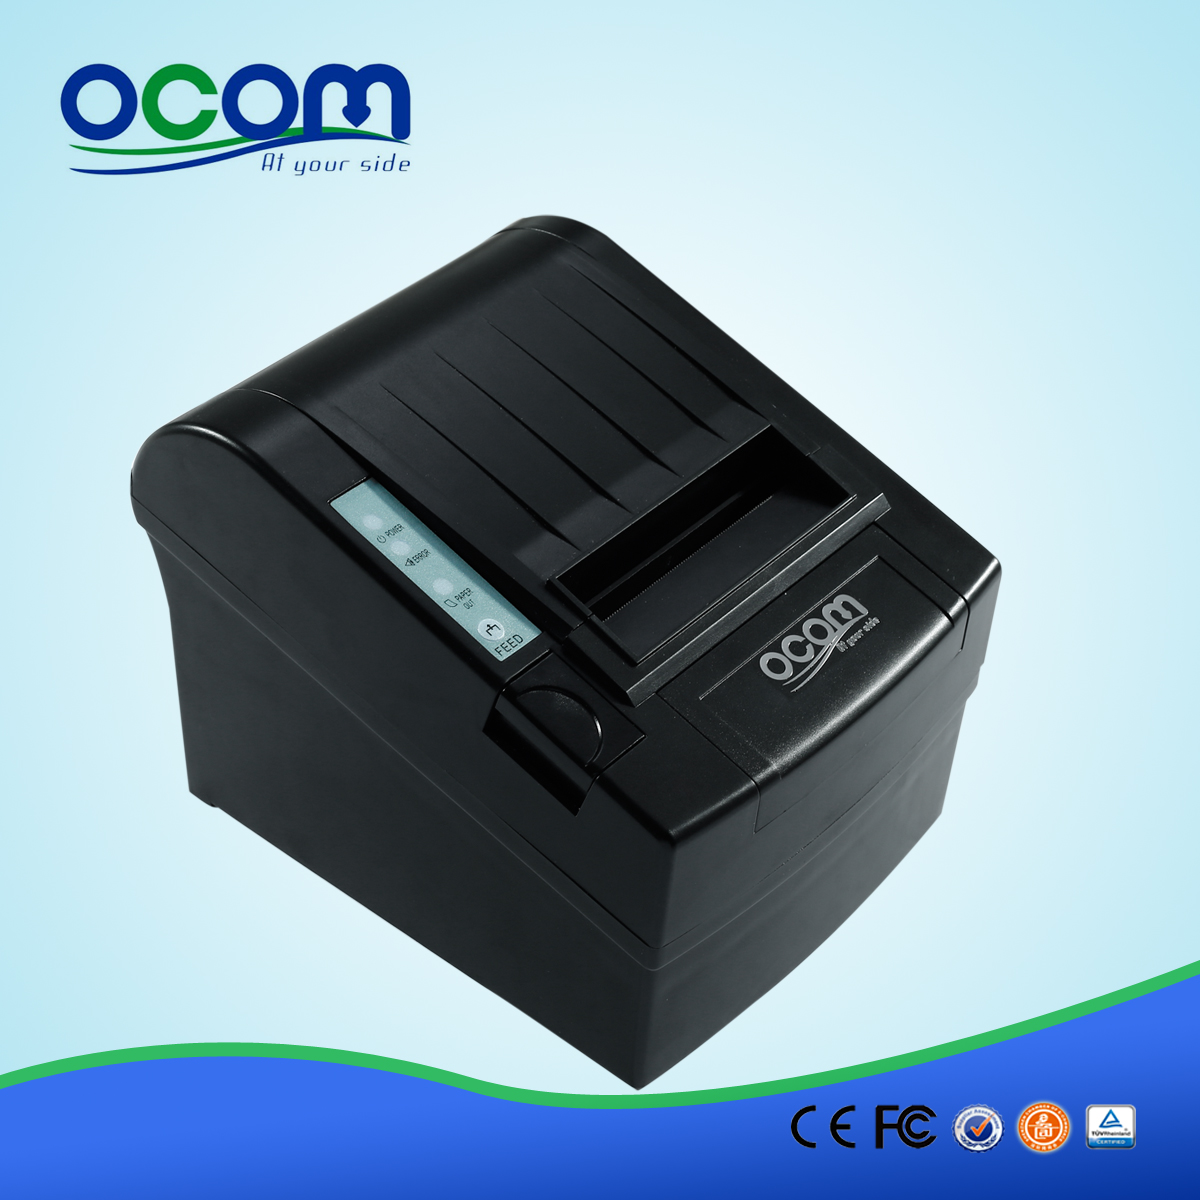 WIFI thermische printer 3 inch Android OS OCPP-806-W